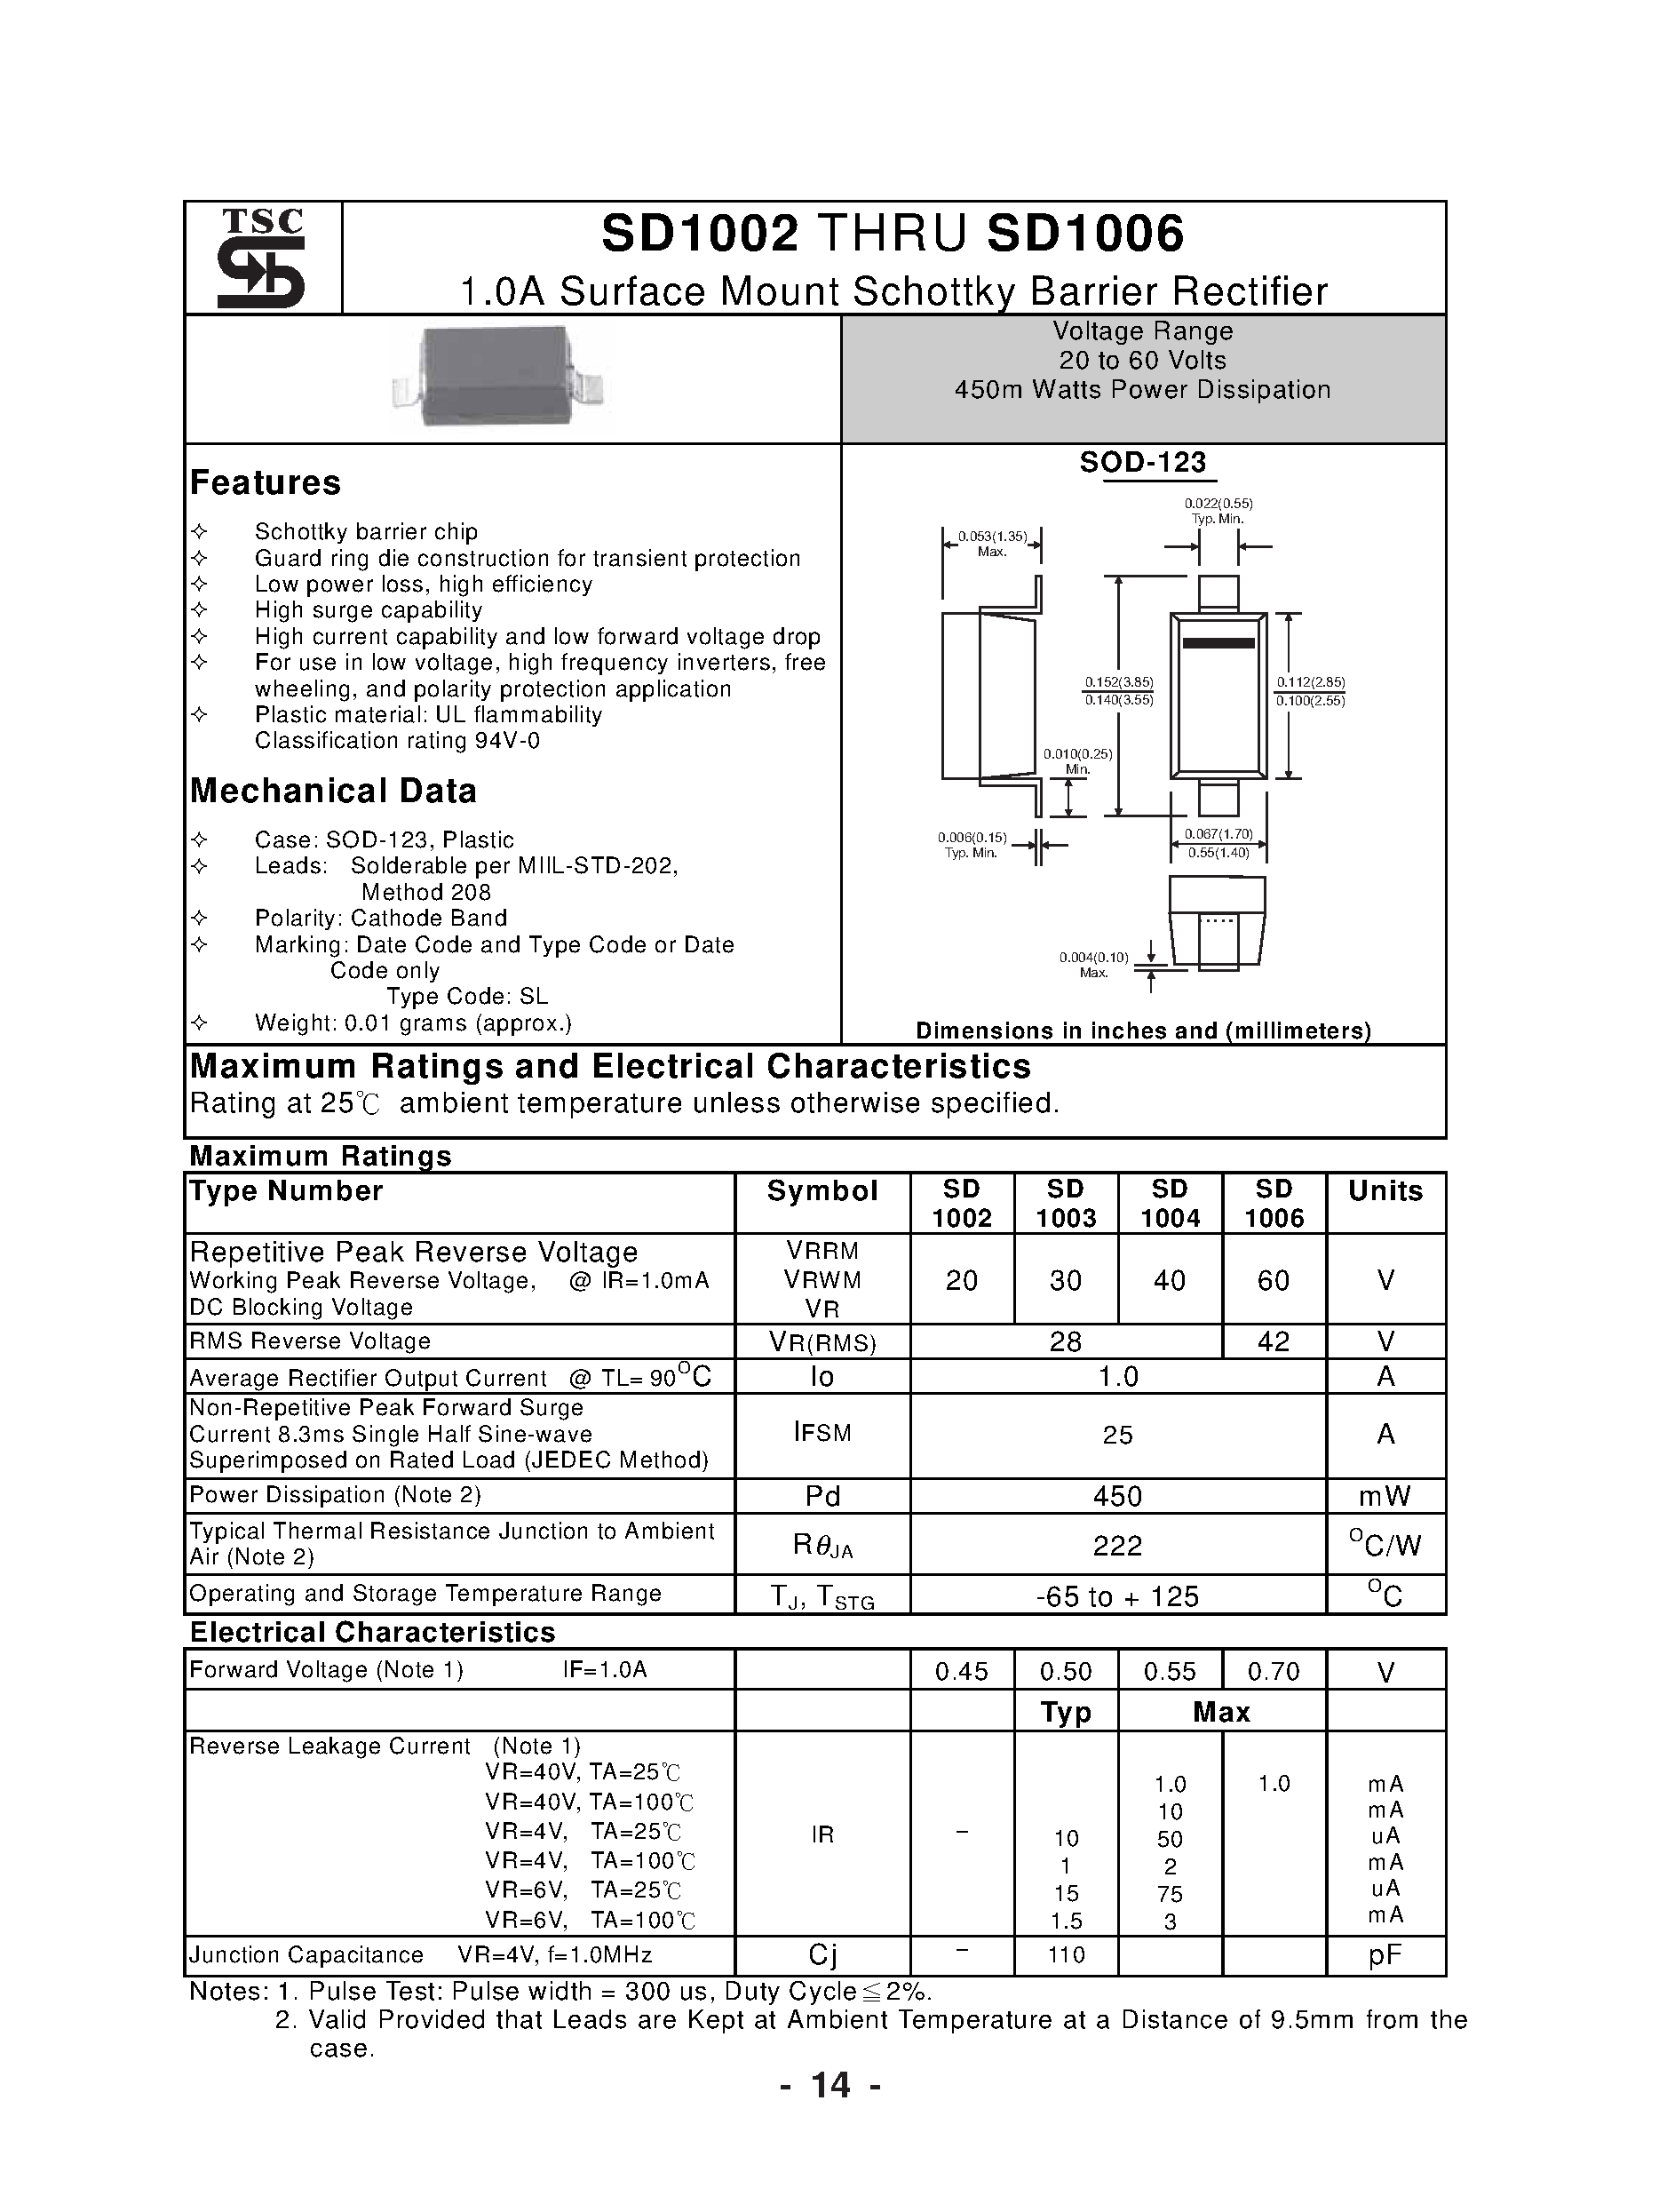 Datasheet SD1002 - (SD1002 - SD1006) 1.0A Surface Mount Schottky Barrier Rectifier page 1